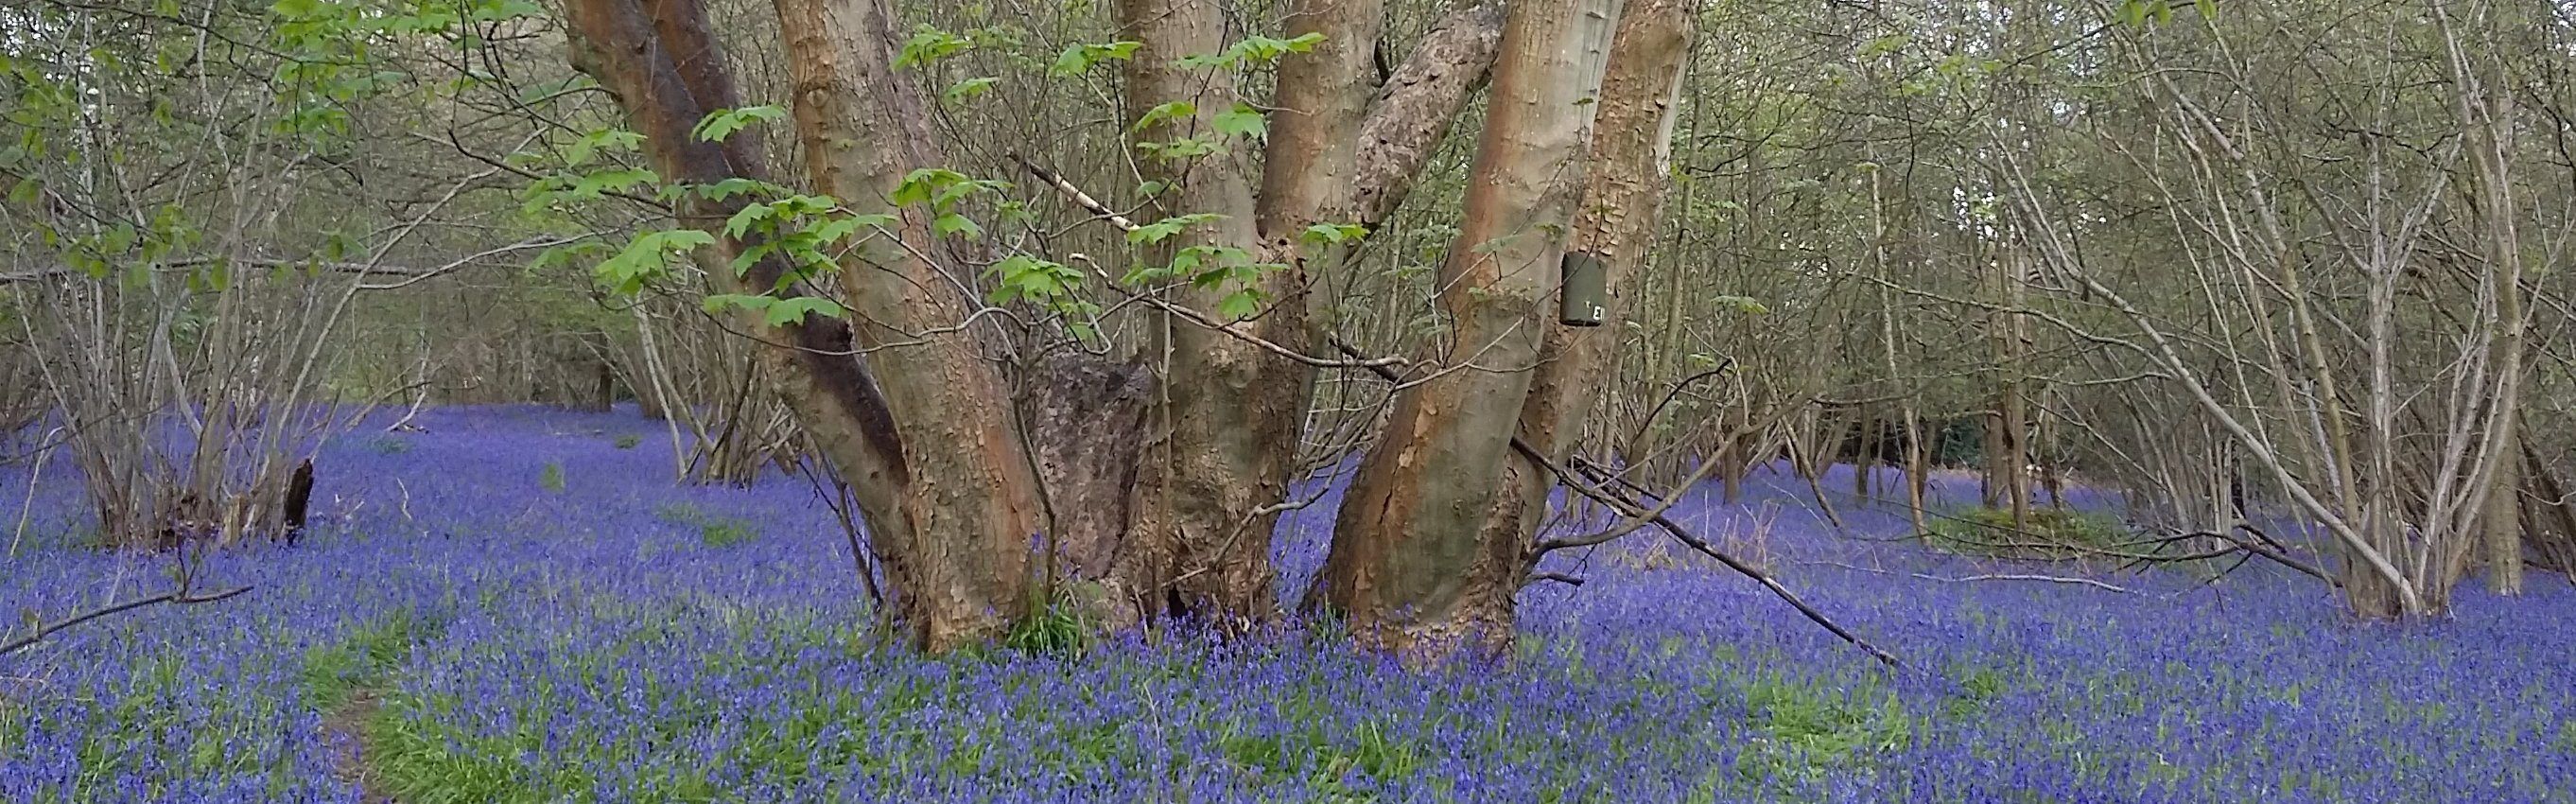 Blue tit nest box on tree above blue bells cover ground